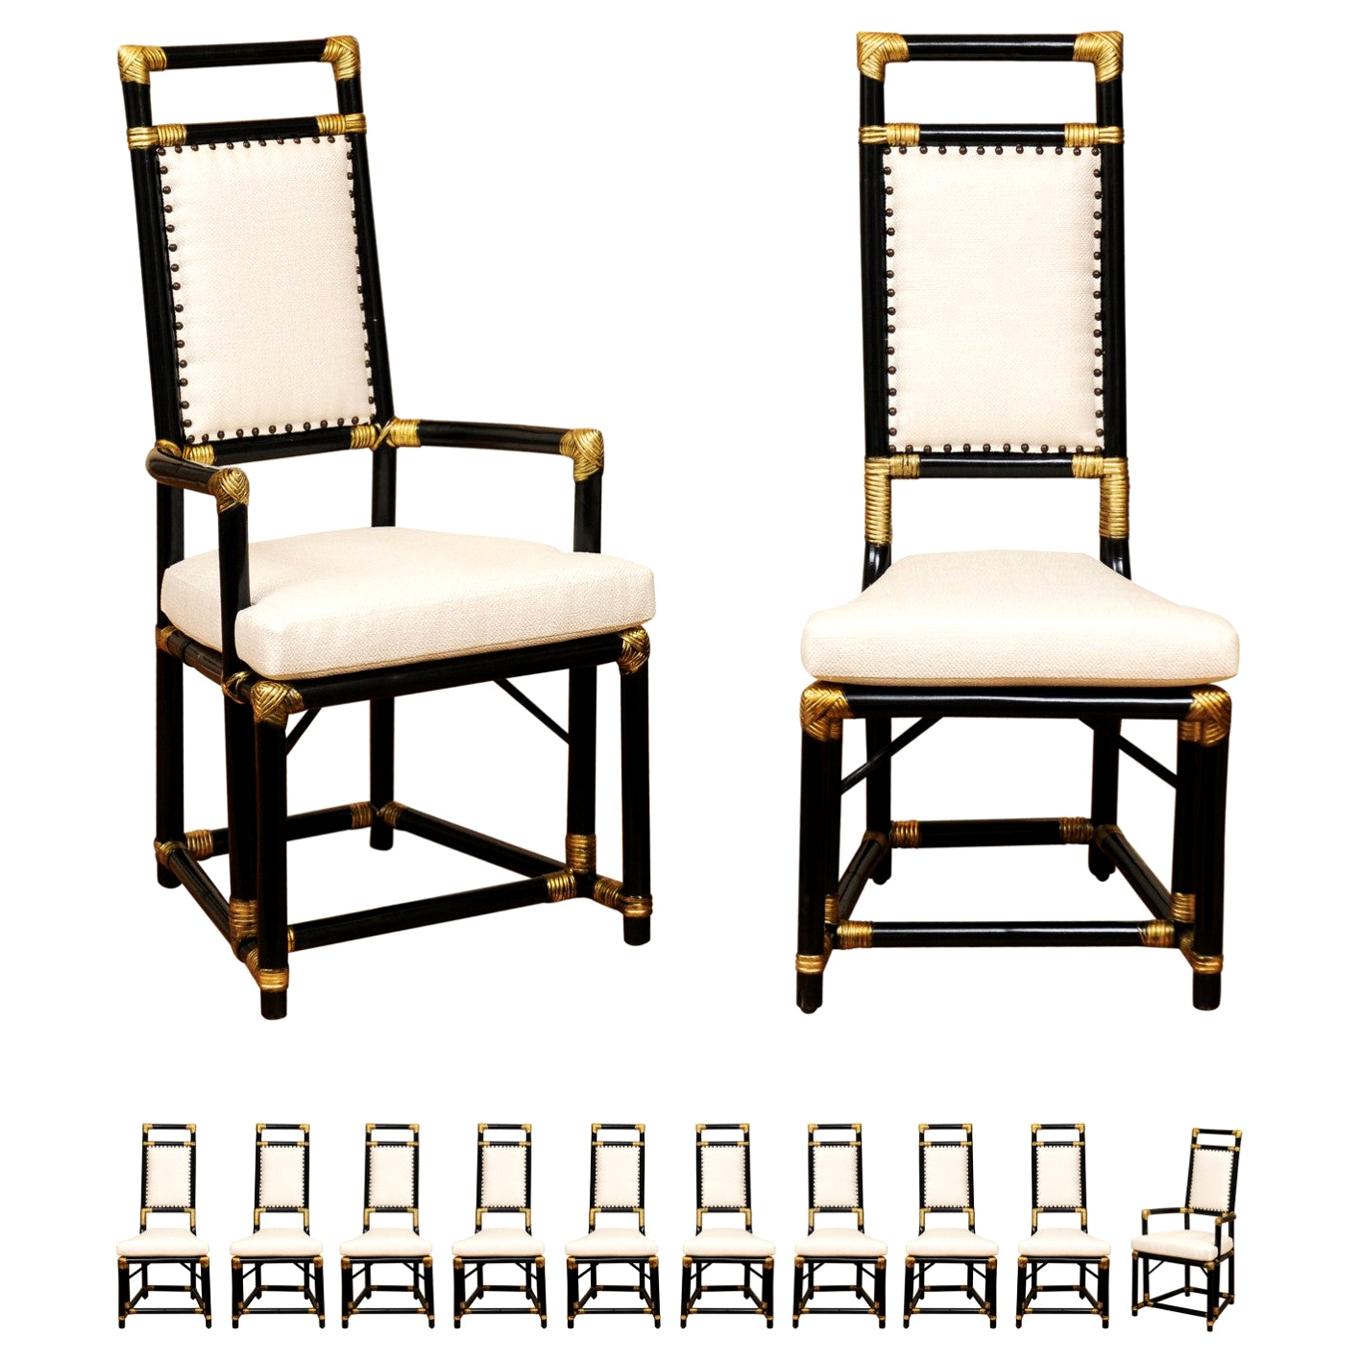 Regal Set of 12 Egyptian Revival Throne Dining Chairs by Henry Olko, circa 1955